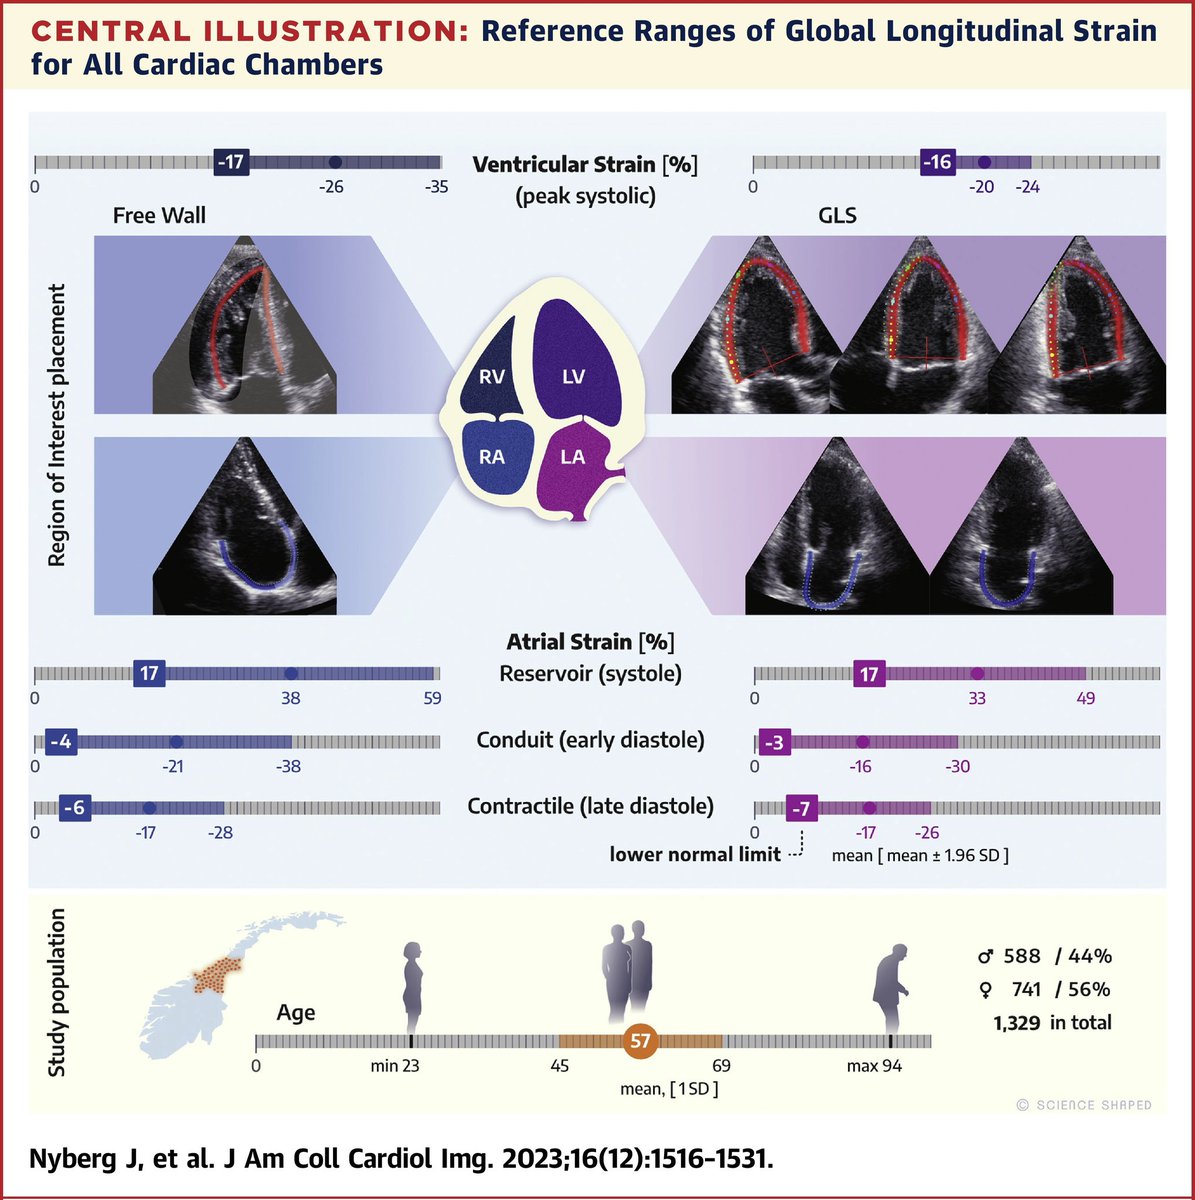 Echocardiographic Reference Ranges of Global Longitudinal Strain for All Cardiac Chambers Using Guideline-Directed Dedicated Views

sciencedirect.com/science/articl…
#echofirst #cardiology #cardiotwitter #heartfailureclin #echofirst #CardioTwitter #cardiology #JACCIMG #CardioEd #Cardiology